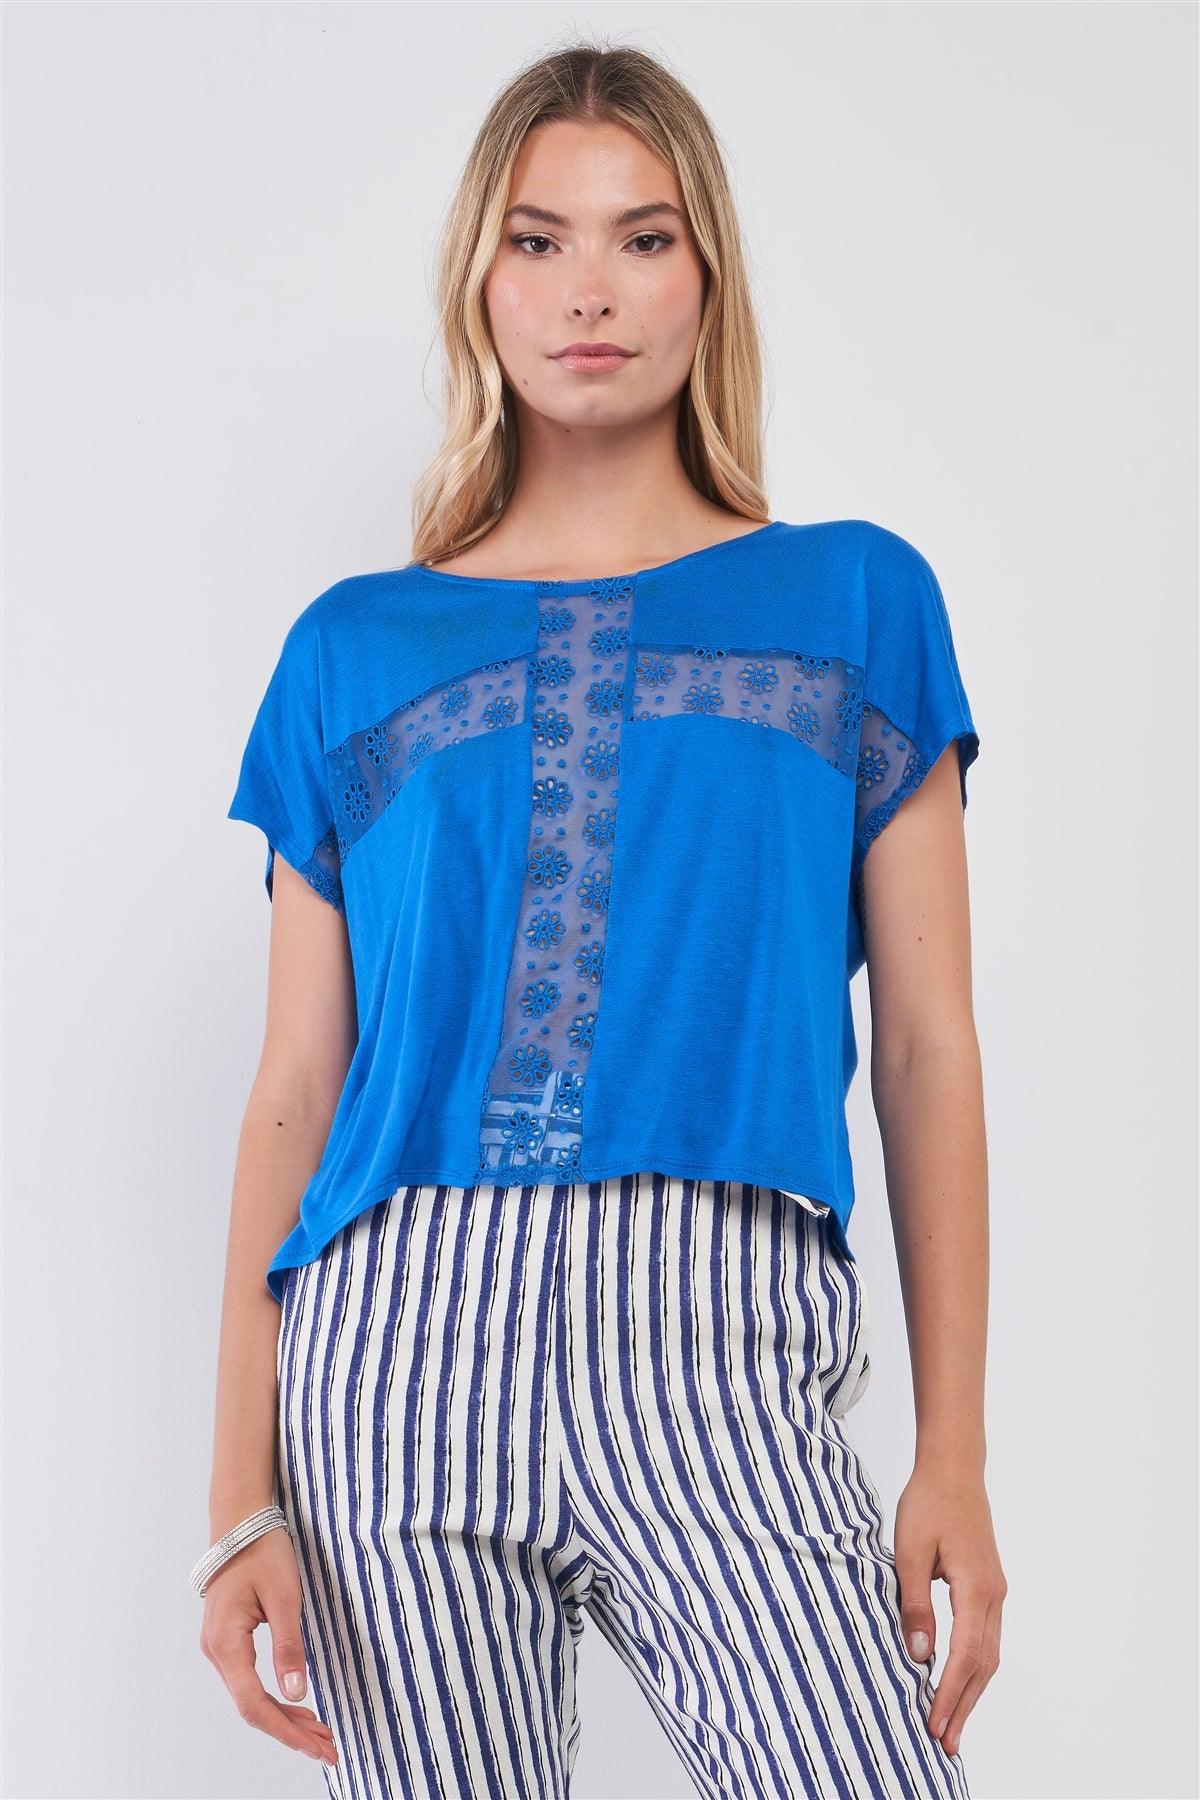 Royal Blue Boat Neck Short Sleeve See-Trough Cross Cut-In Detail With Floral Embroidery Top